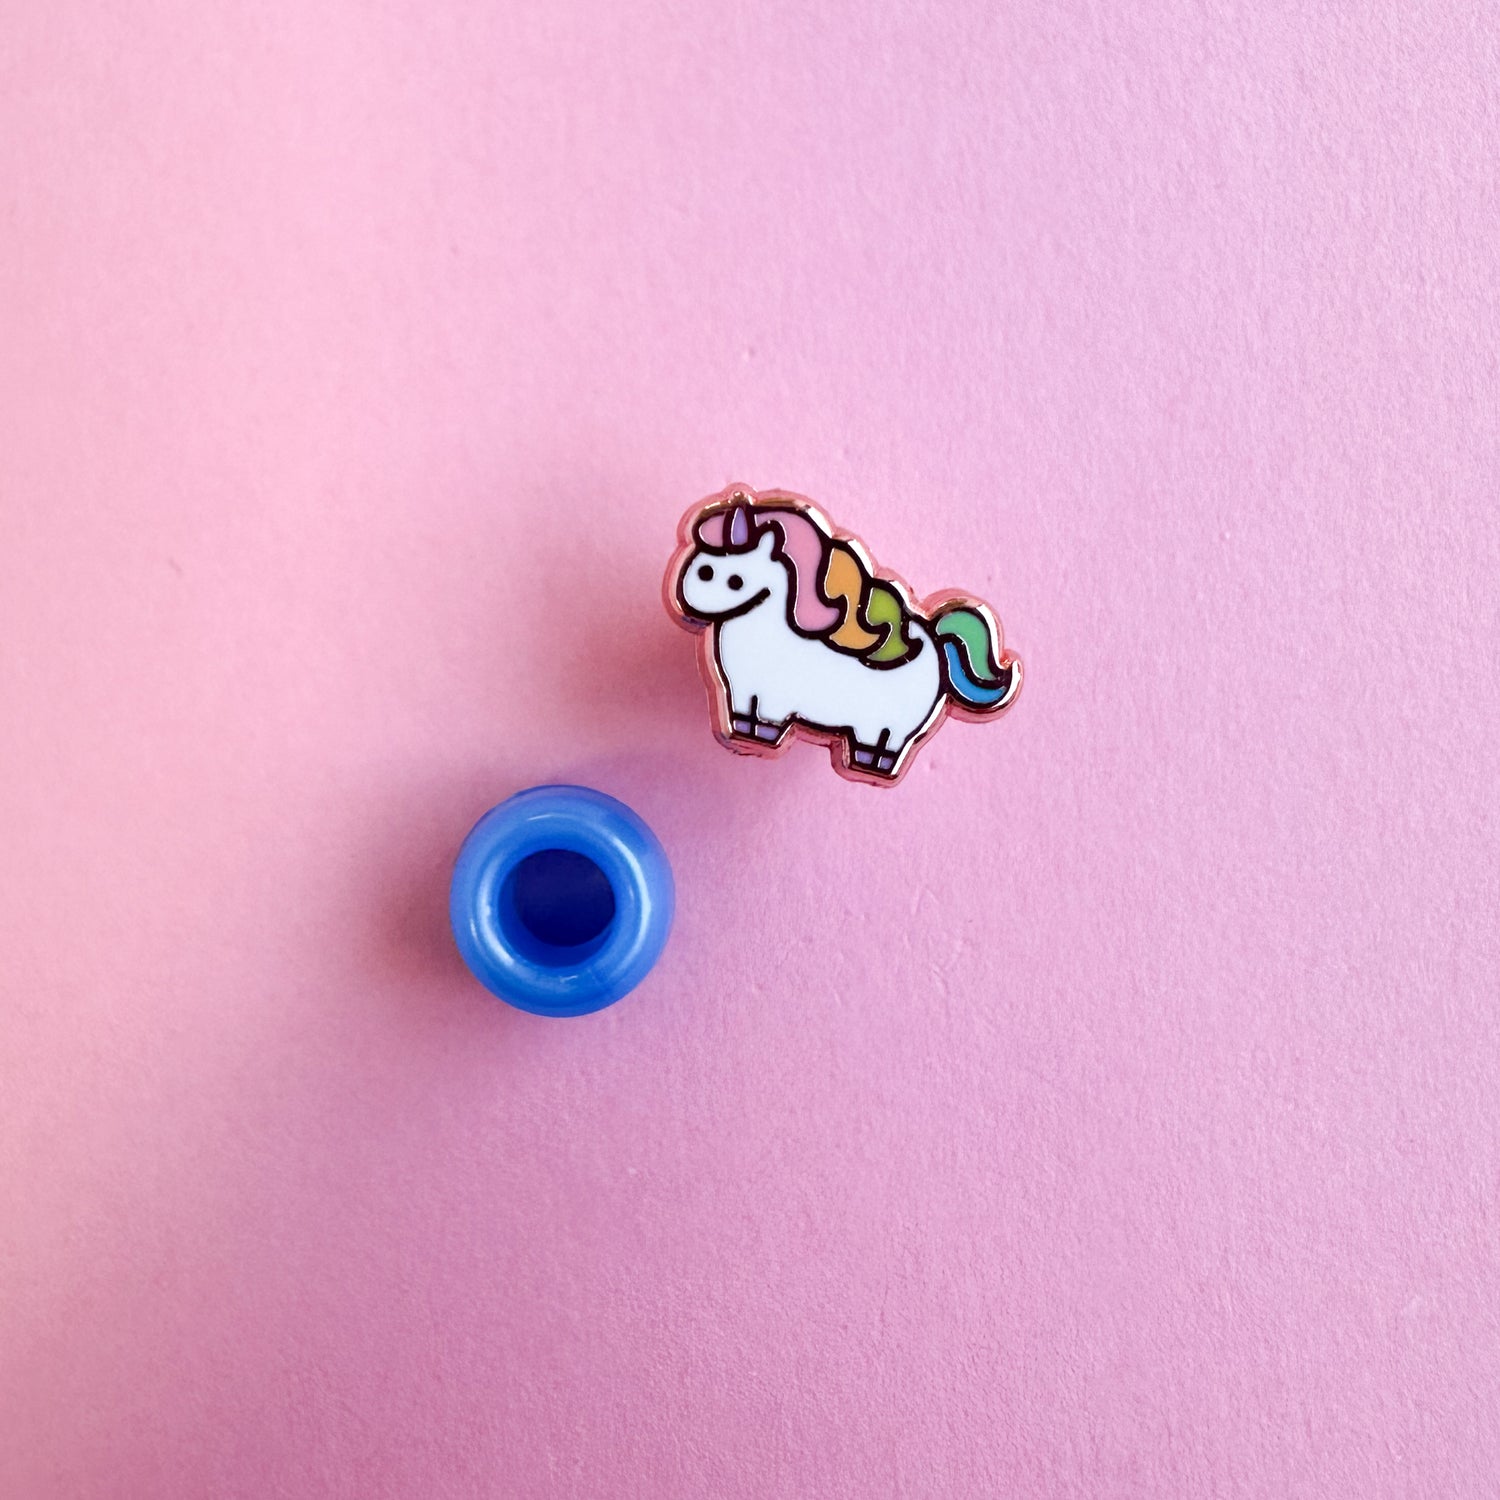 A mini unicorn pin with a blue plastic pony bead next to it for scale. 